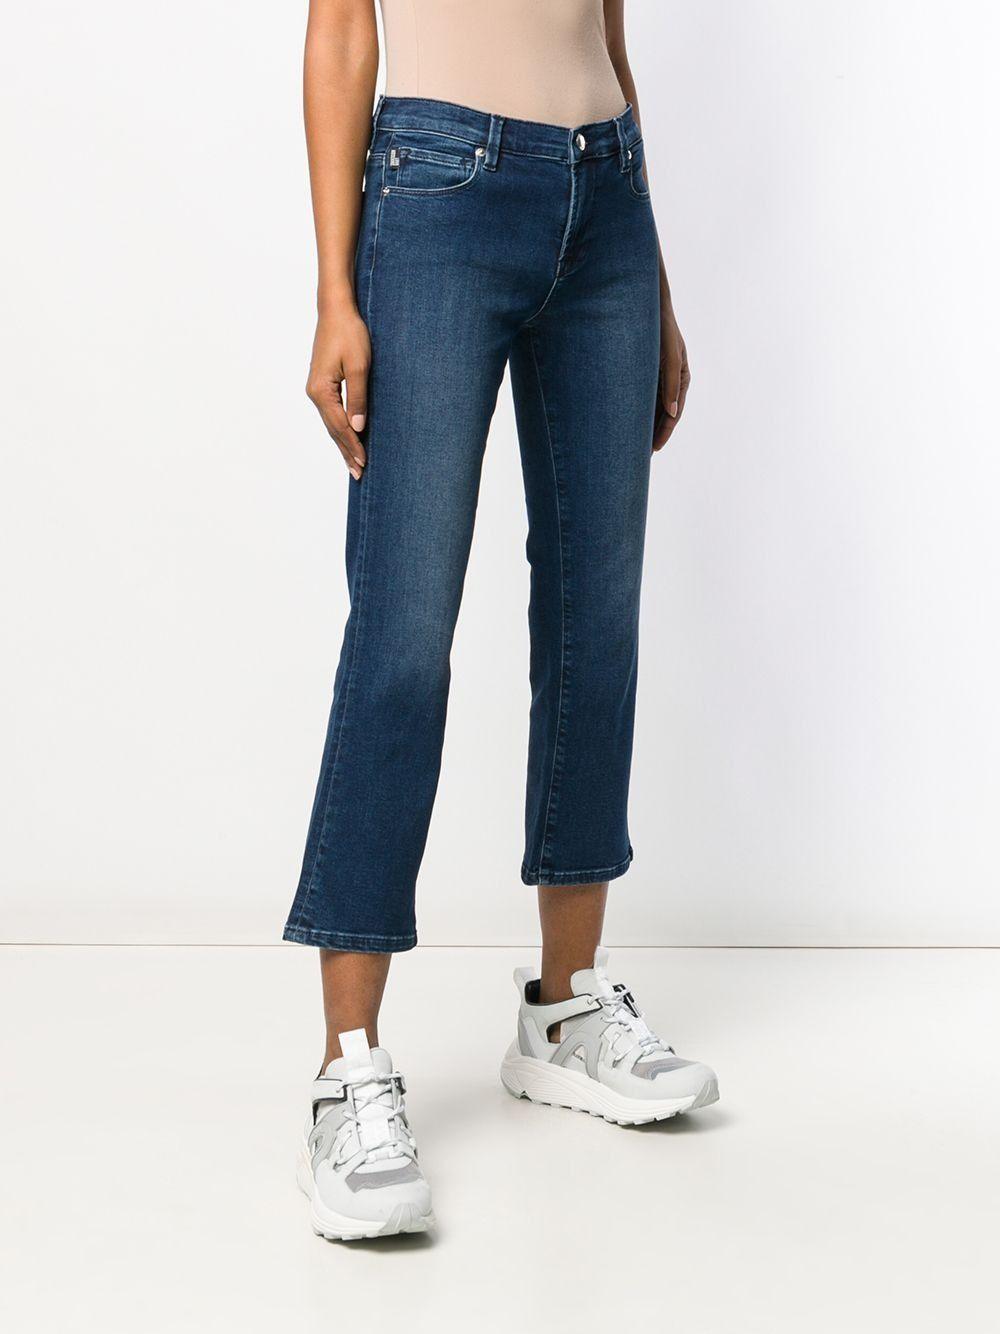 Love Moschino Women's Blue Cotton Low Rise Cropped Jeans designed by Love Moschino available from Moon Behind The Hill 's Clothing > Pants > Womens range